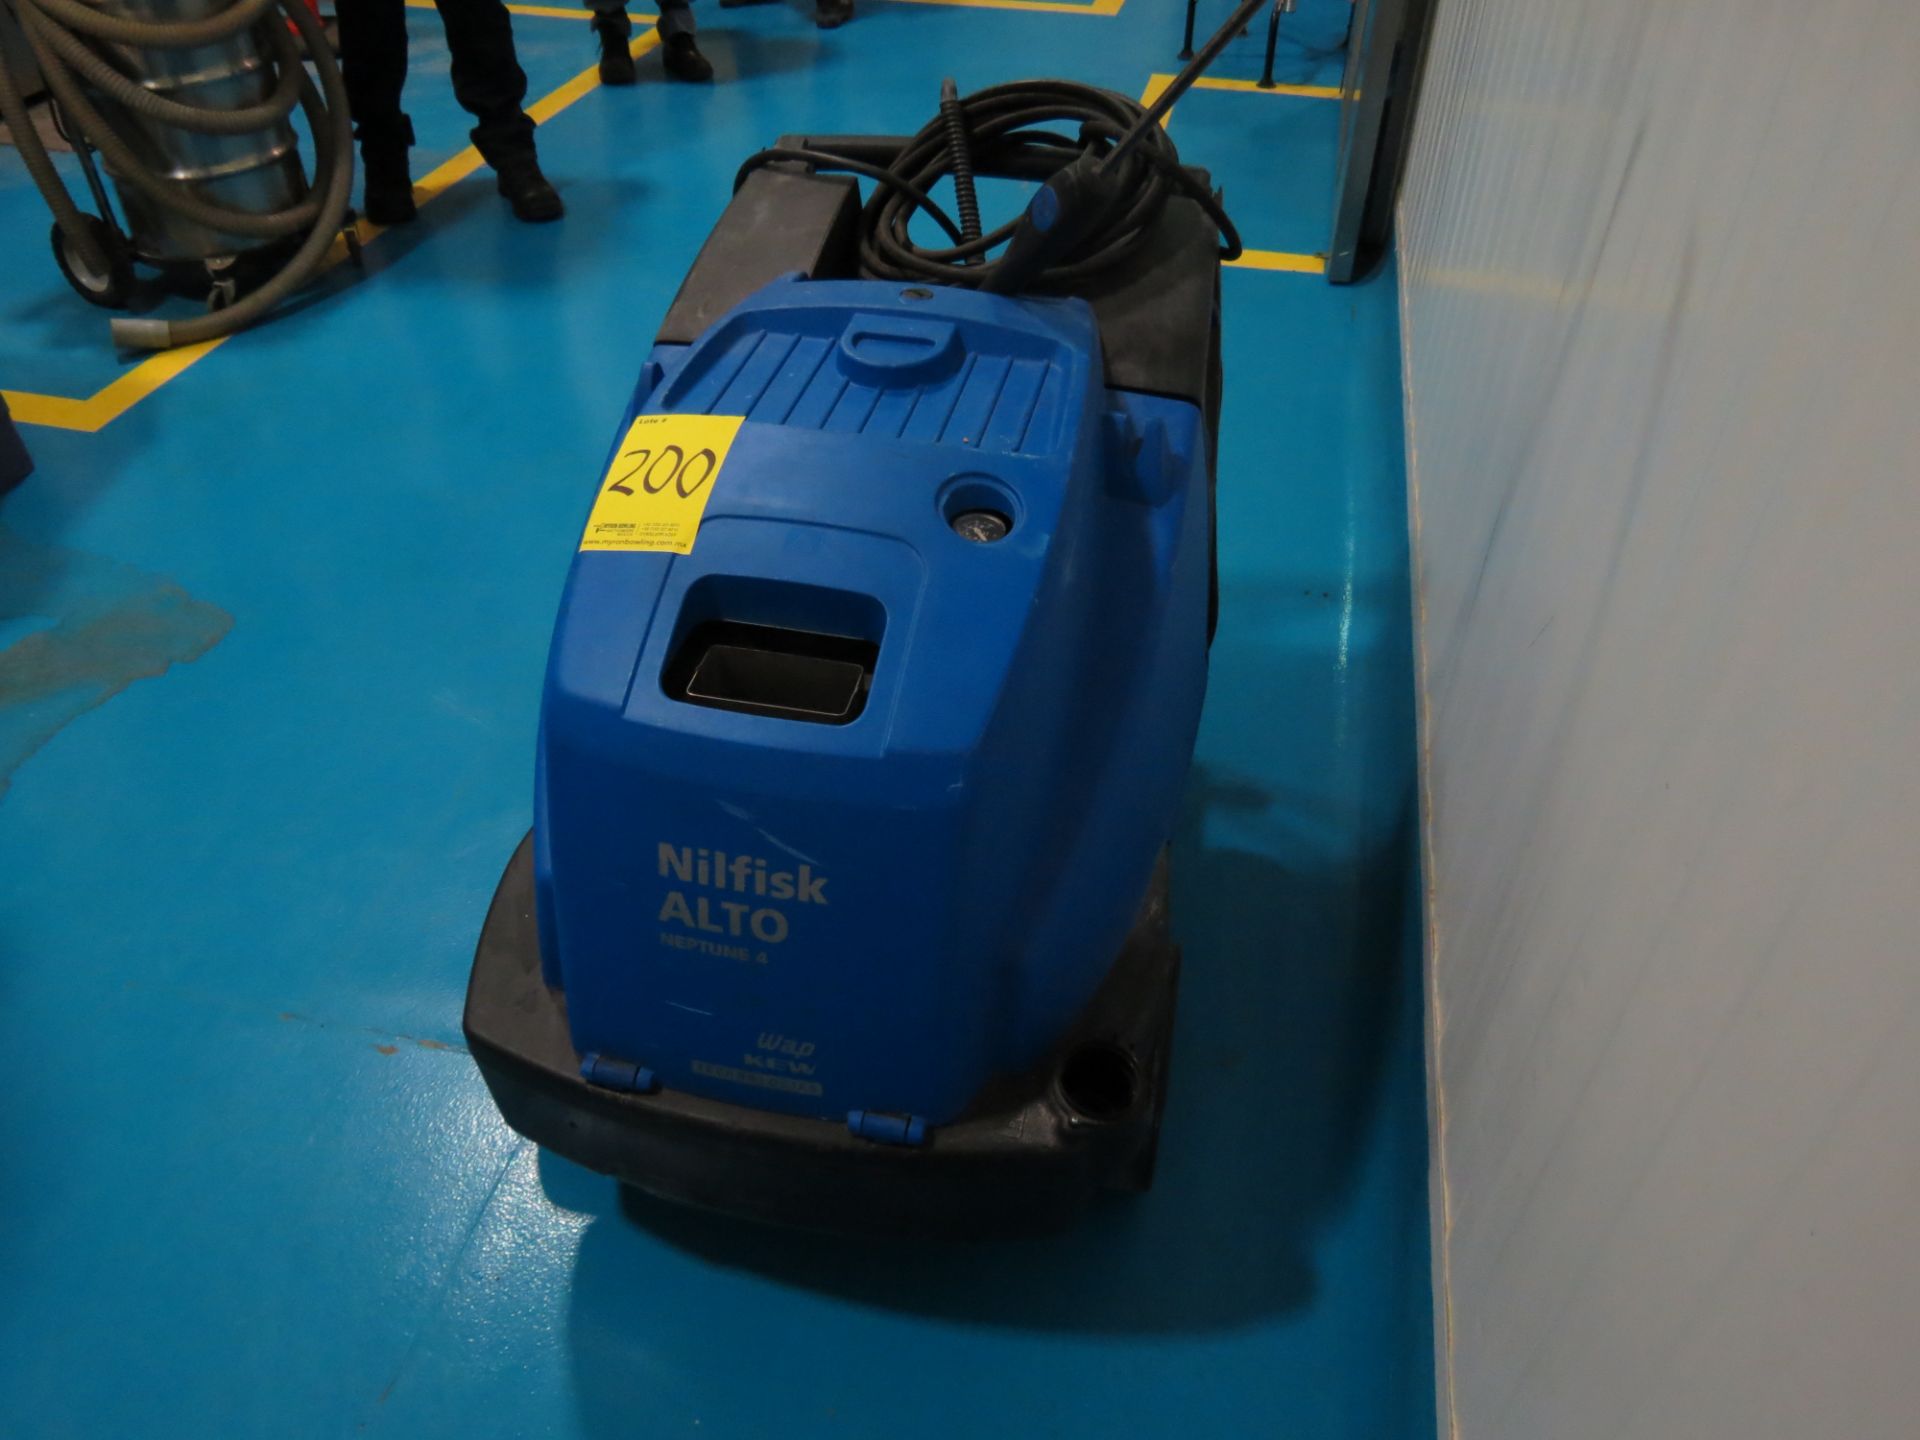 Alto High pressure washing machine brand Nilfisk with Hot Water, Capacity 6.7 L/min - Image 4 of 7